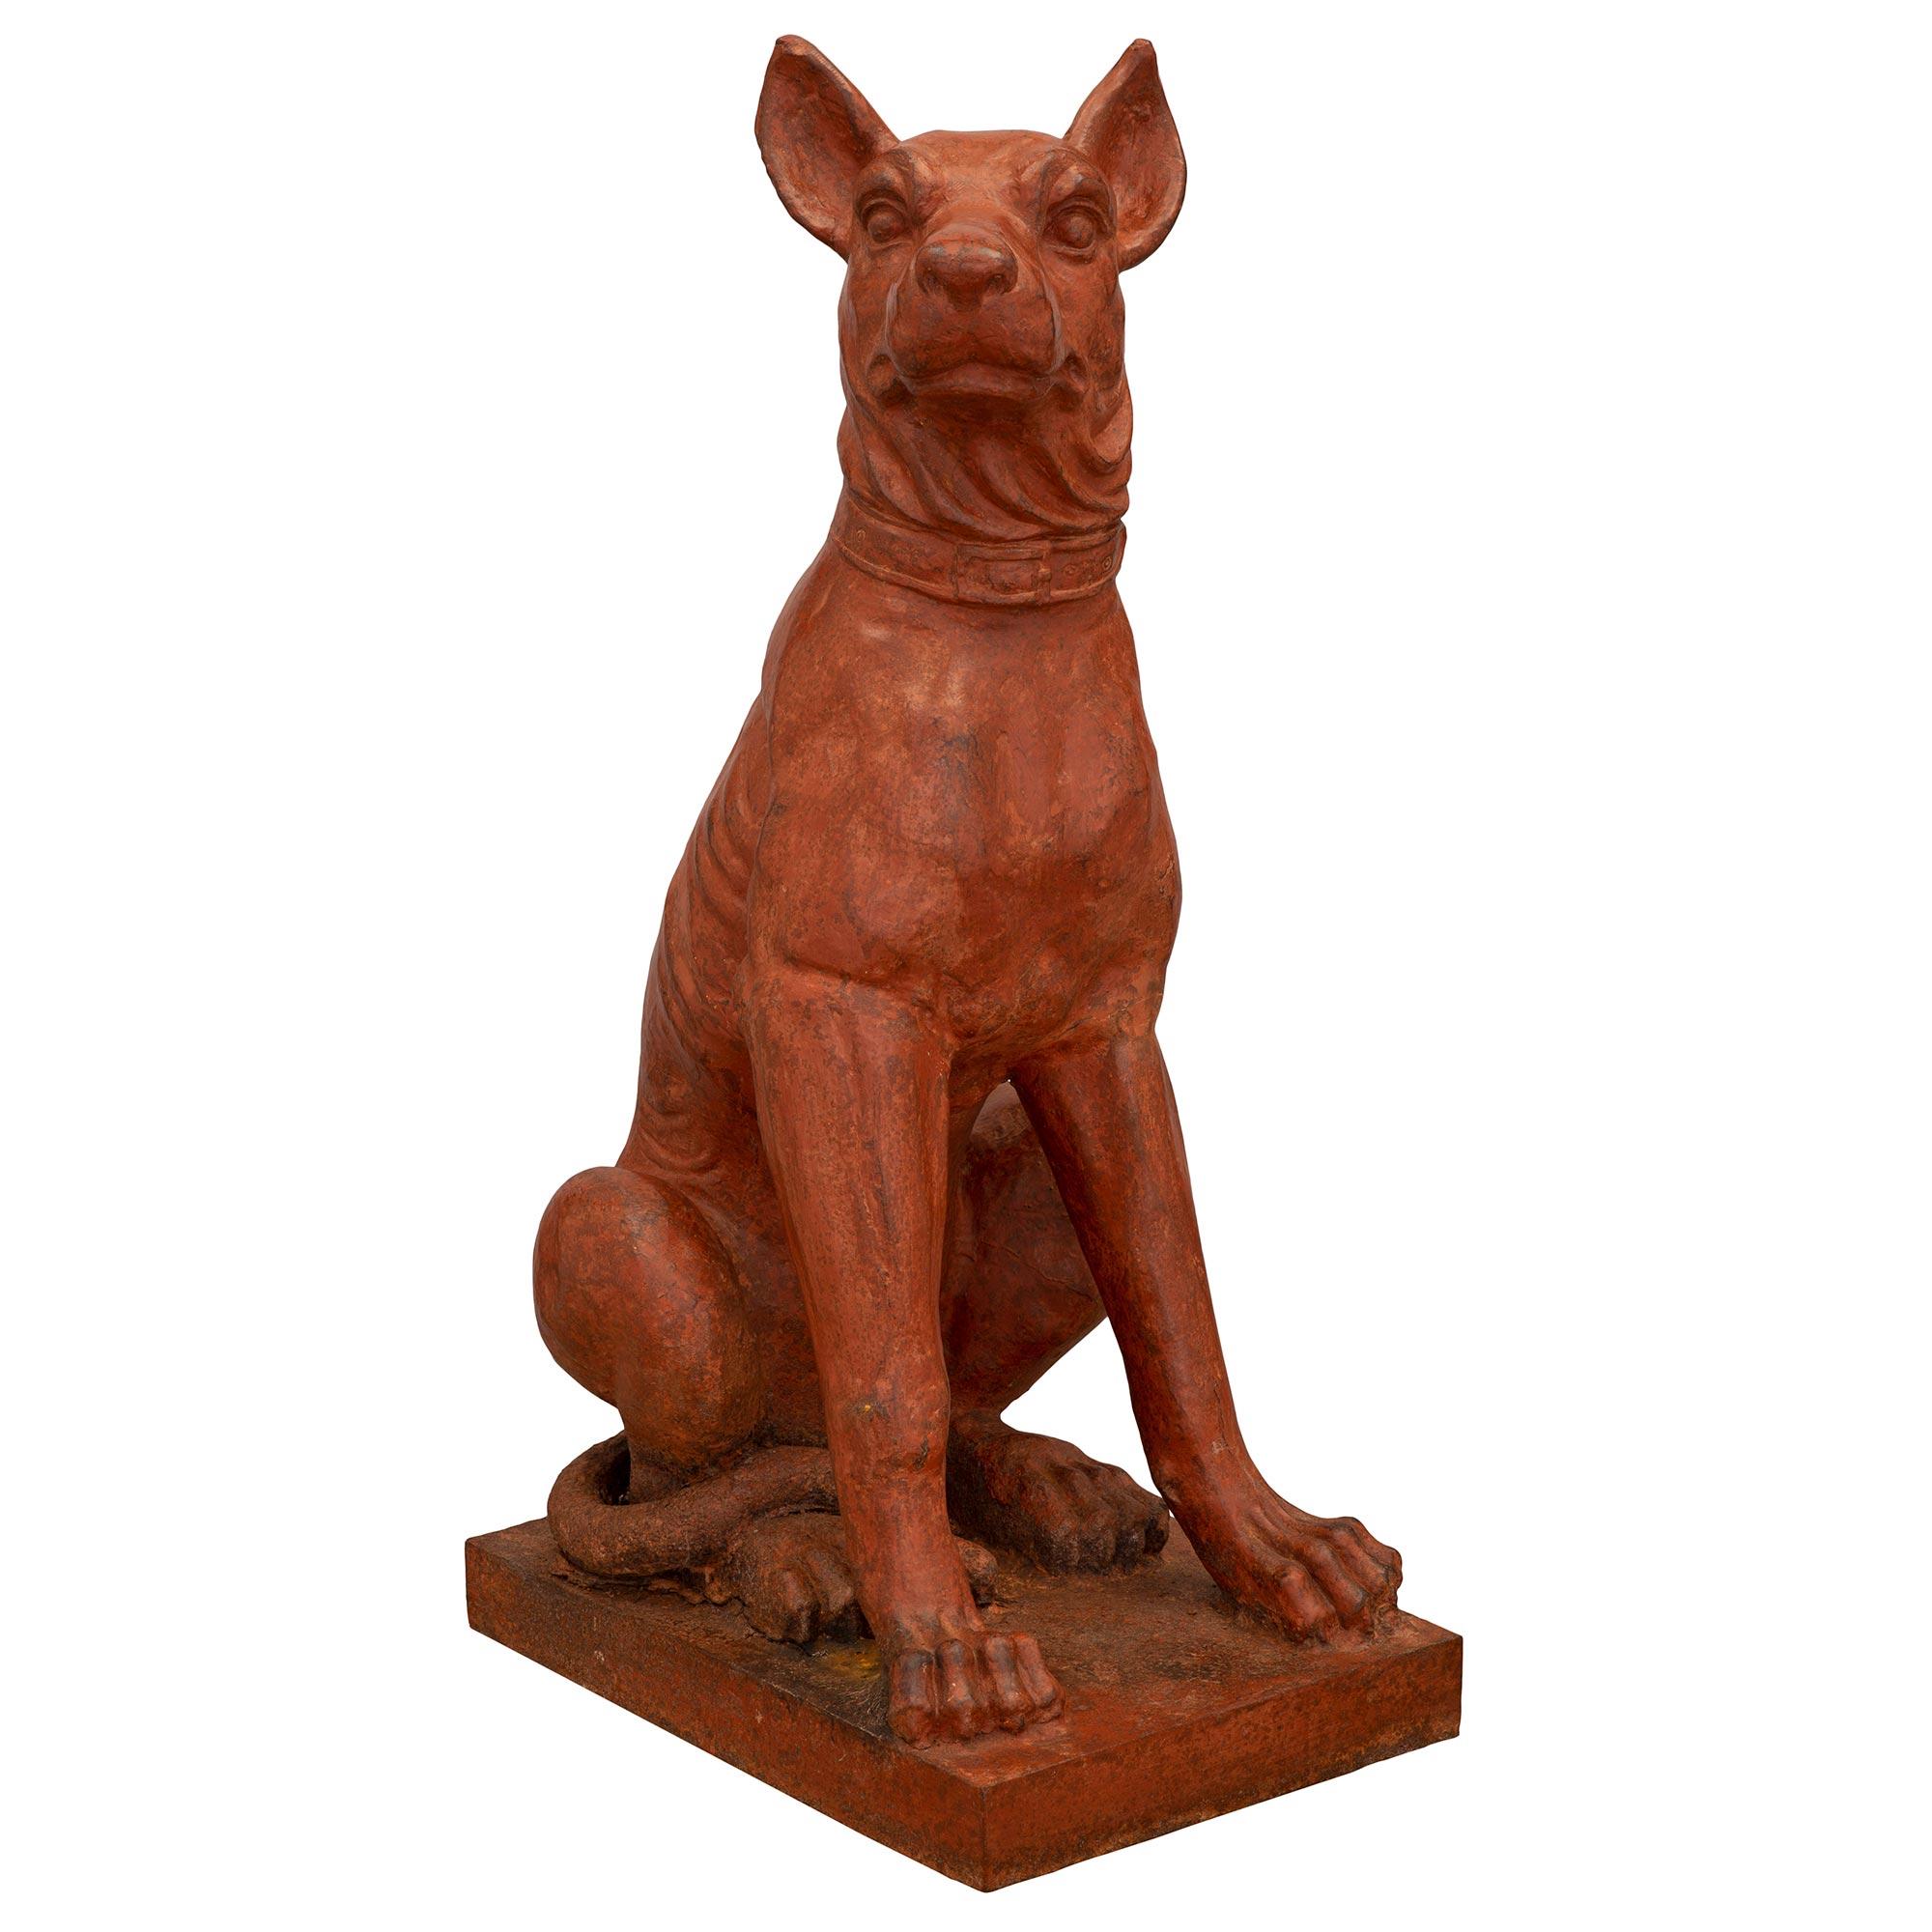 A handsome and most impressive true pair of French 19th century patinated cast iron dog statues. Each statue is raised by a rectangular base where the dogs above are seated while wearing a collar with fine detail throughout. All original terra cotta